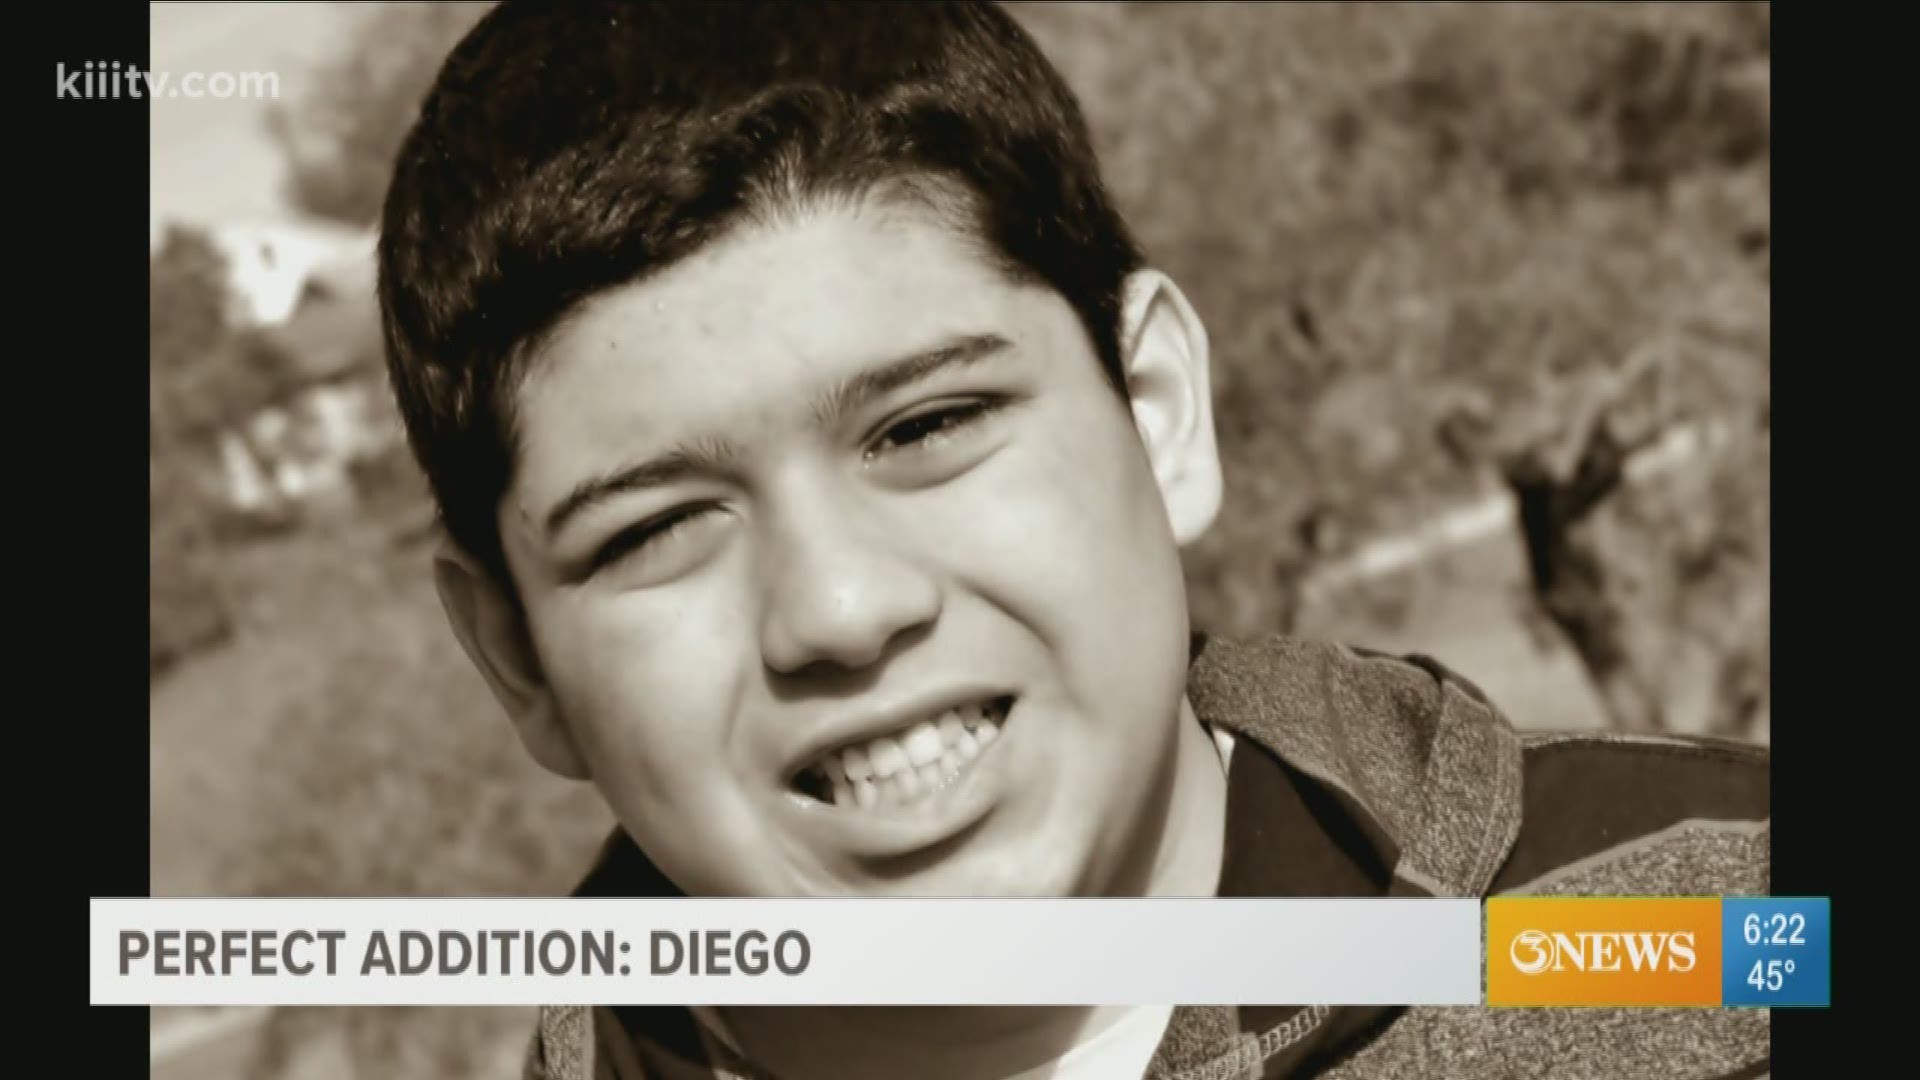 Diego is 14 years old and he loves superheroes. He is this week's Perfect Addition!